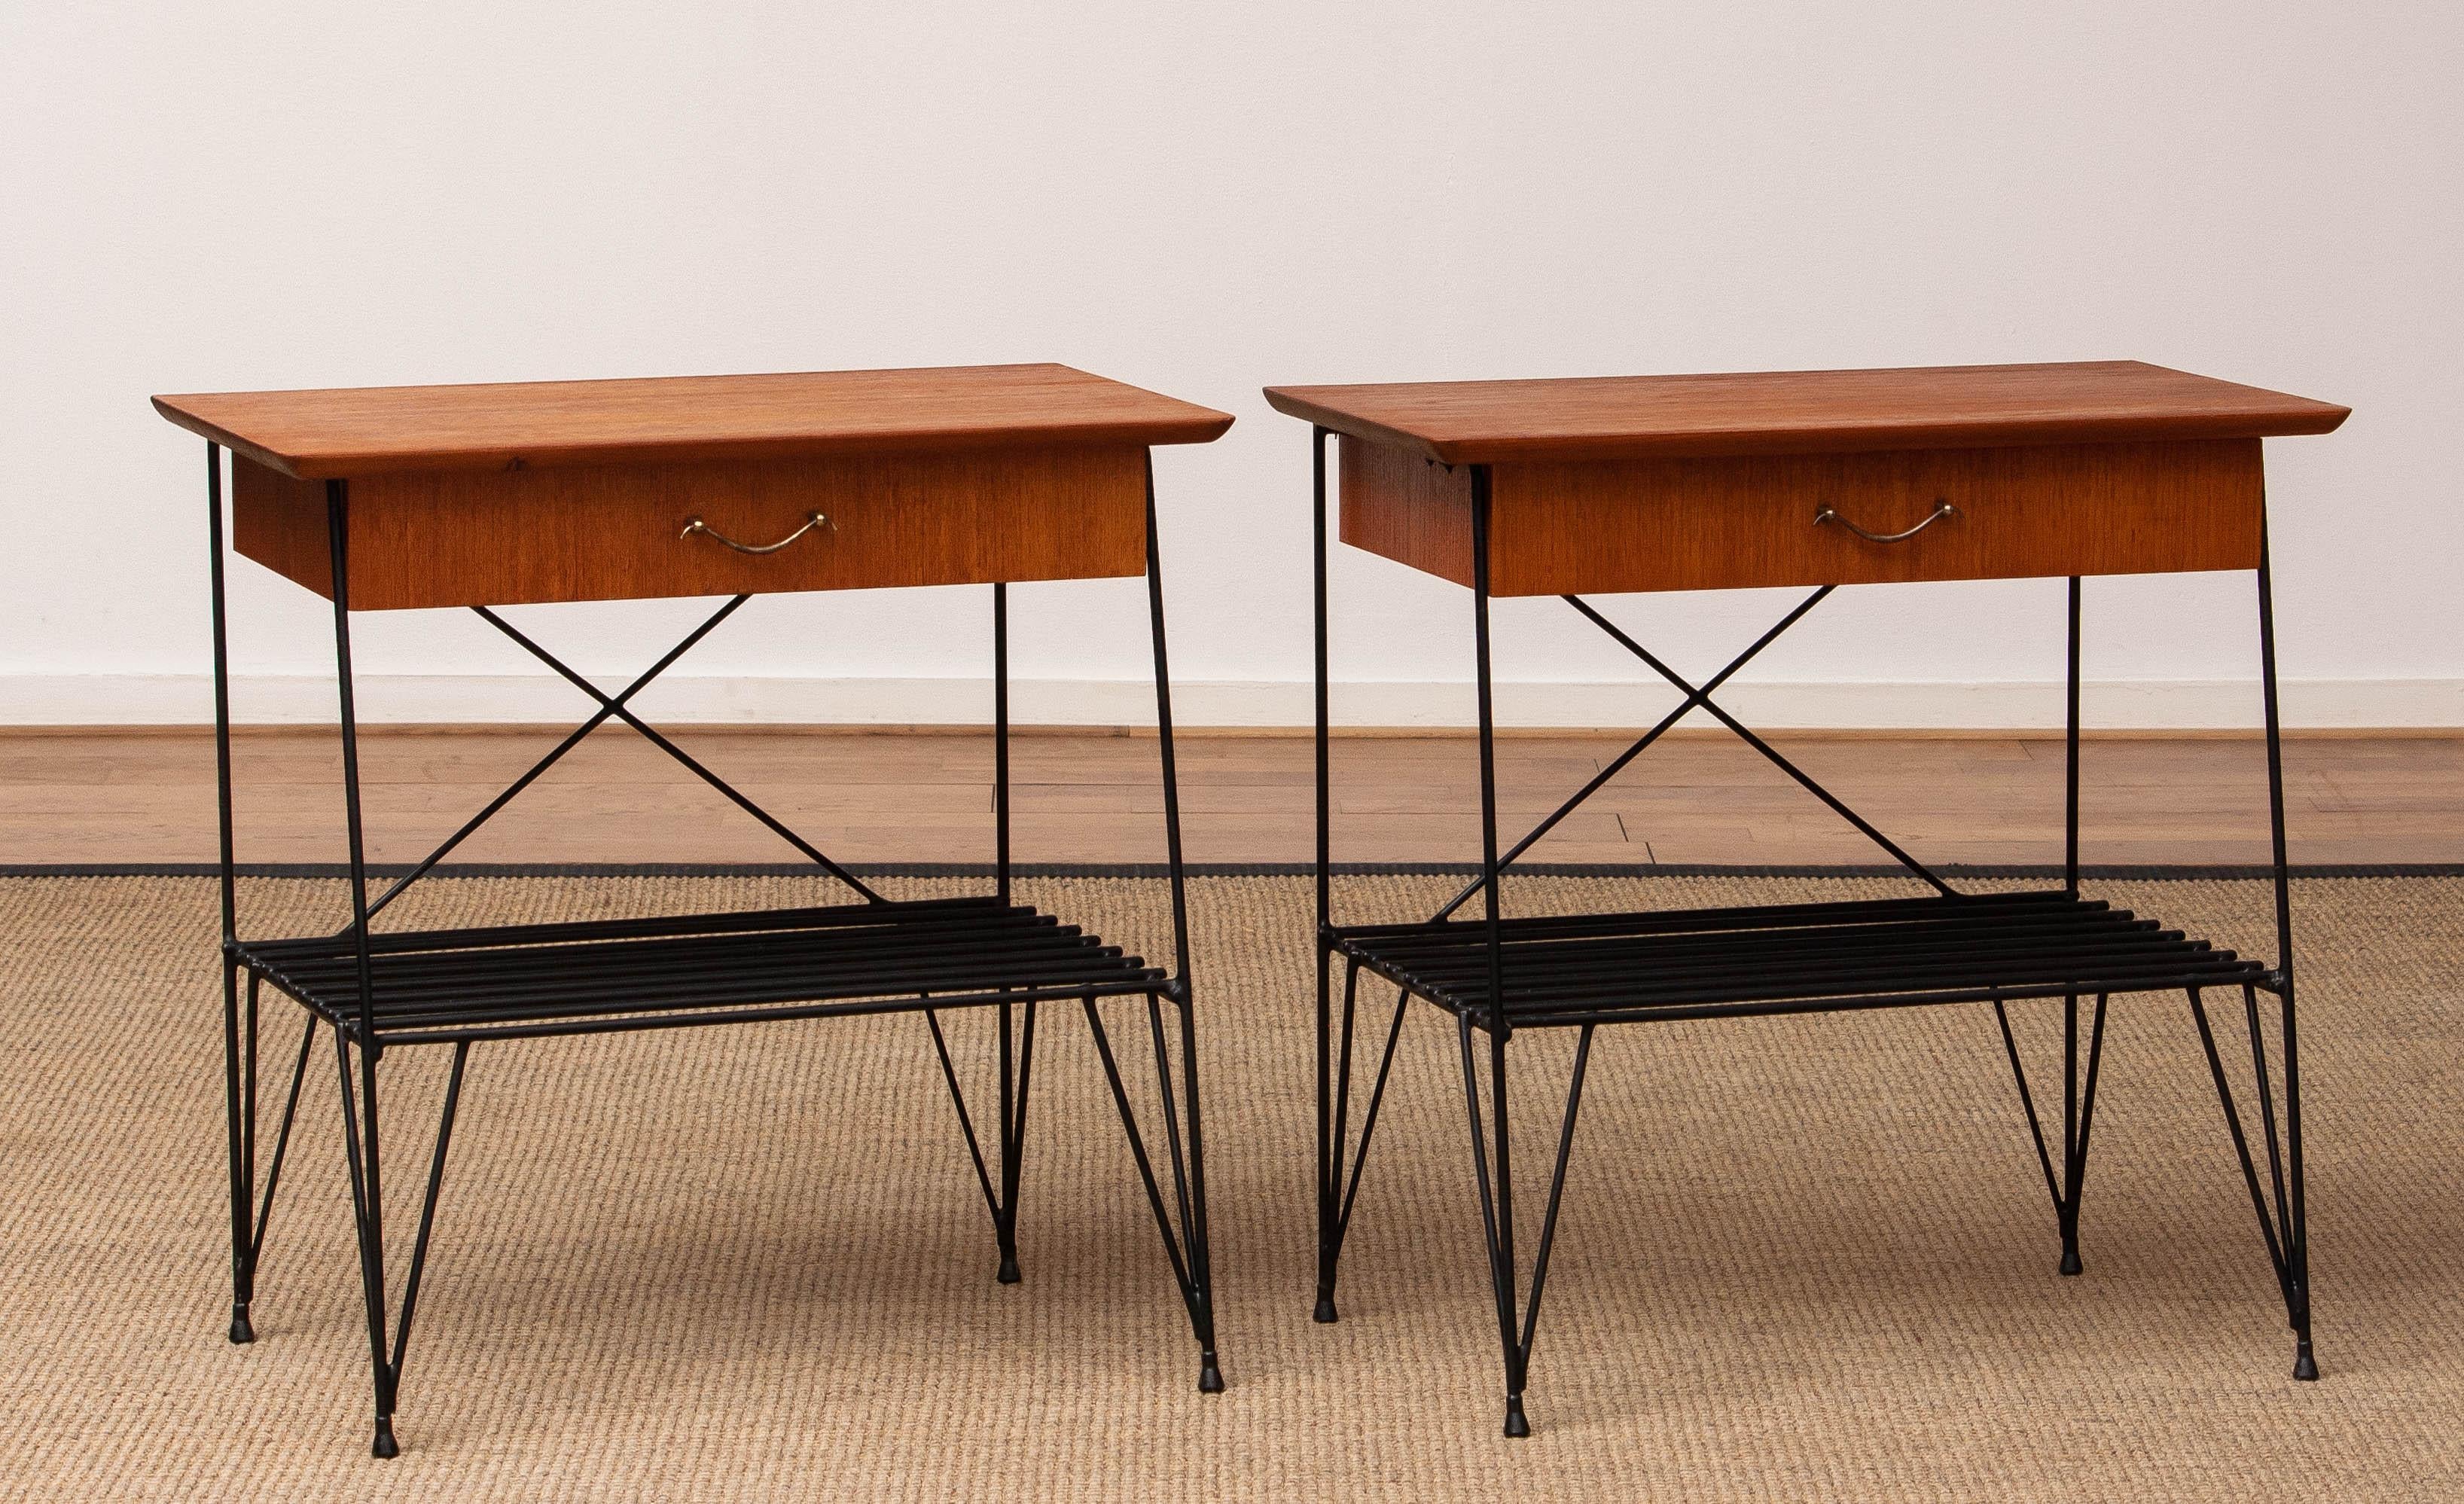 Beautiful and rare pair Swedish nightstands / side tables in the famous 'Johan Gullberg' style
made of metal wire in combination with a teak cabinet including one drawer each.
Period: 1950-1959, Sweden.
The dimensions are H 53 cm, W 52 cm, D 31